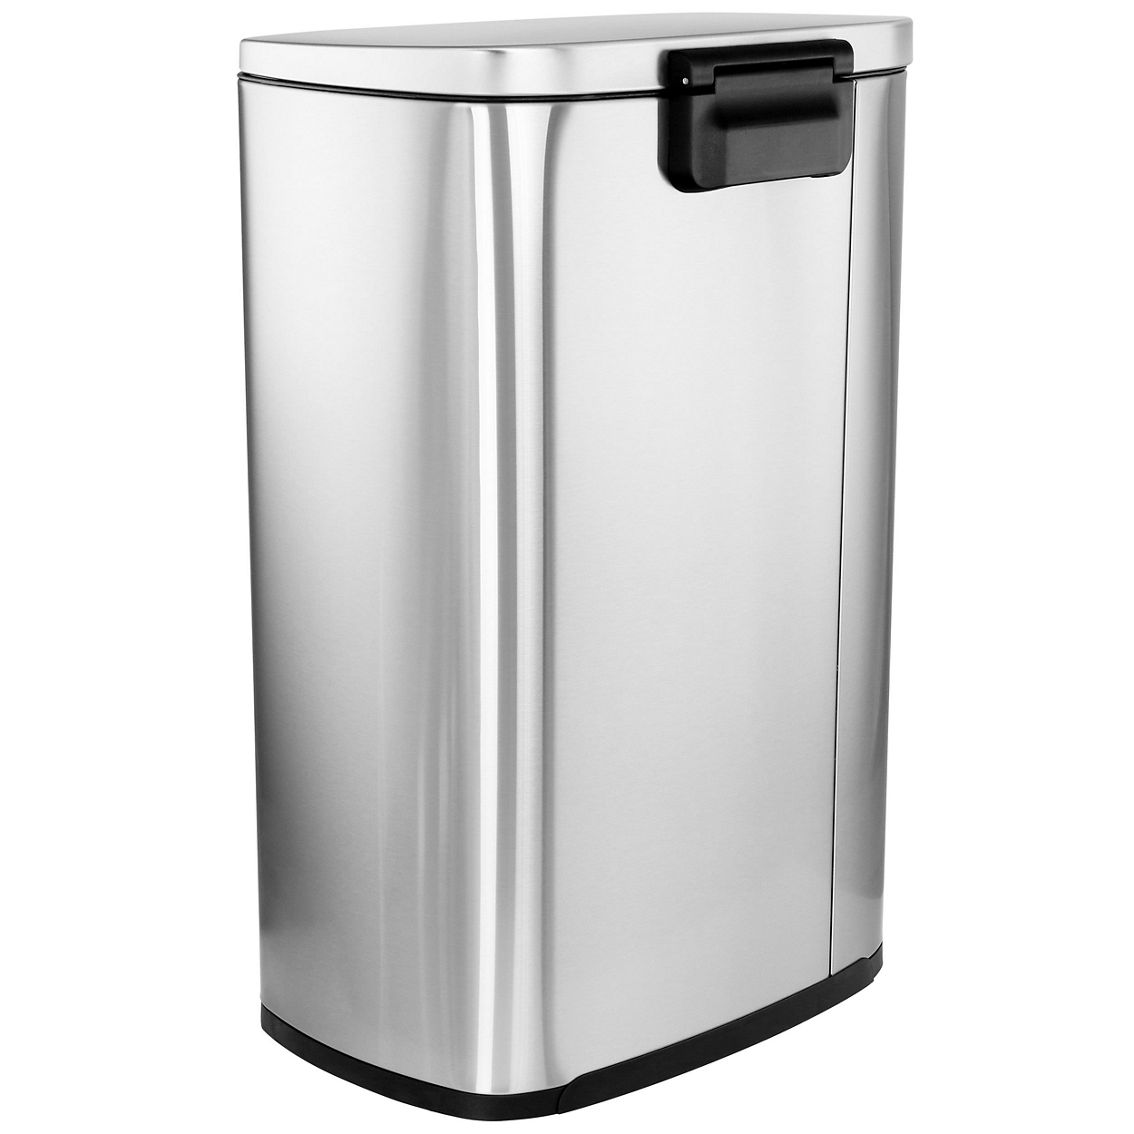 Elama 3 Piece 50 Liter and 5 Liter Stainless Steel Step Trash Bin Combo Set with - Image 4 of 5